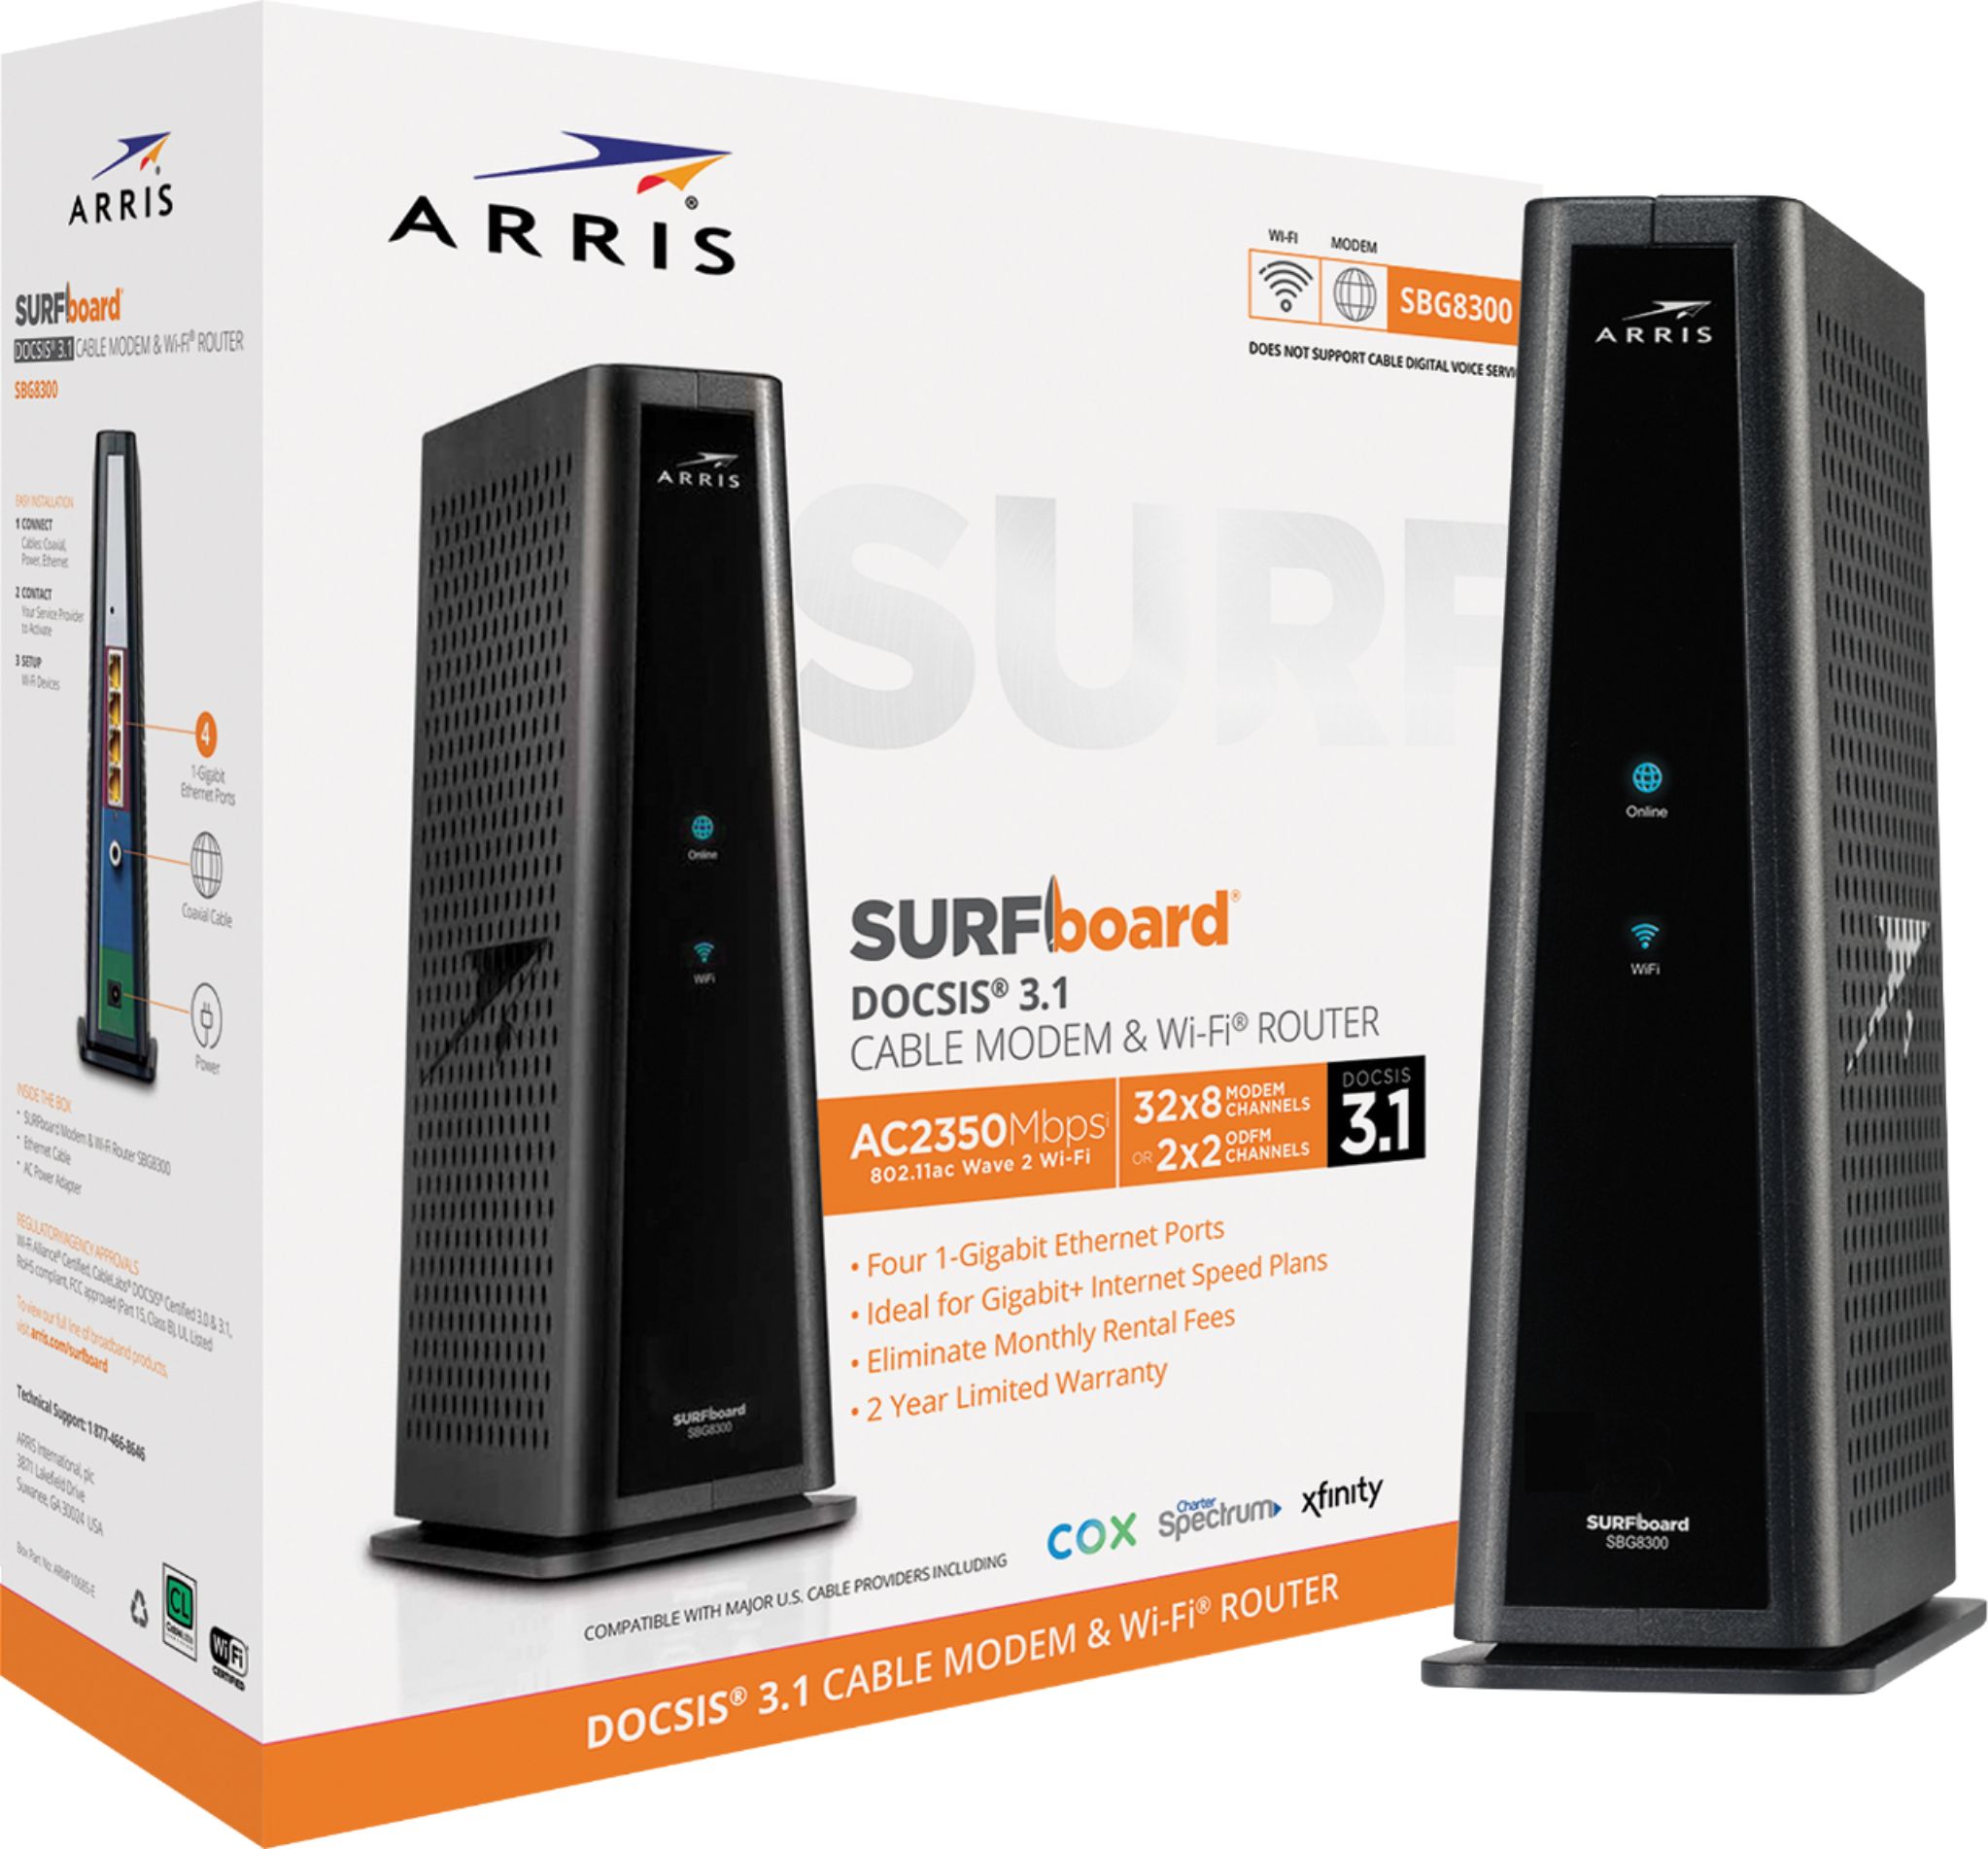 arris sbg8300 cable modem and wifi router